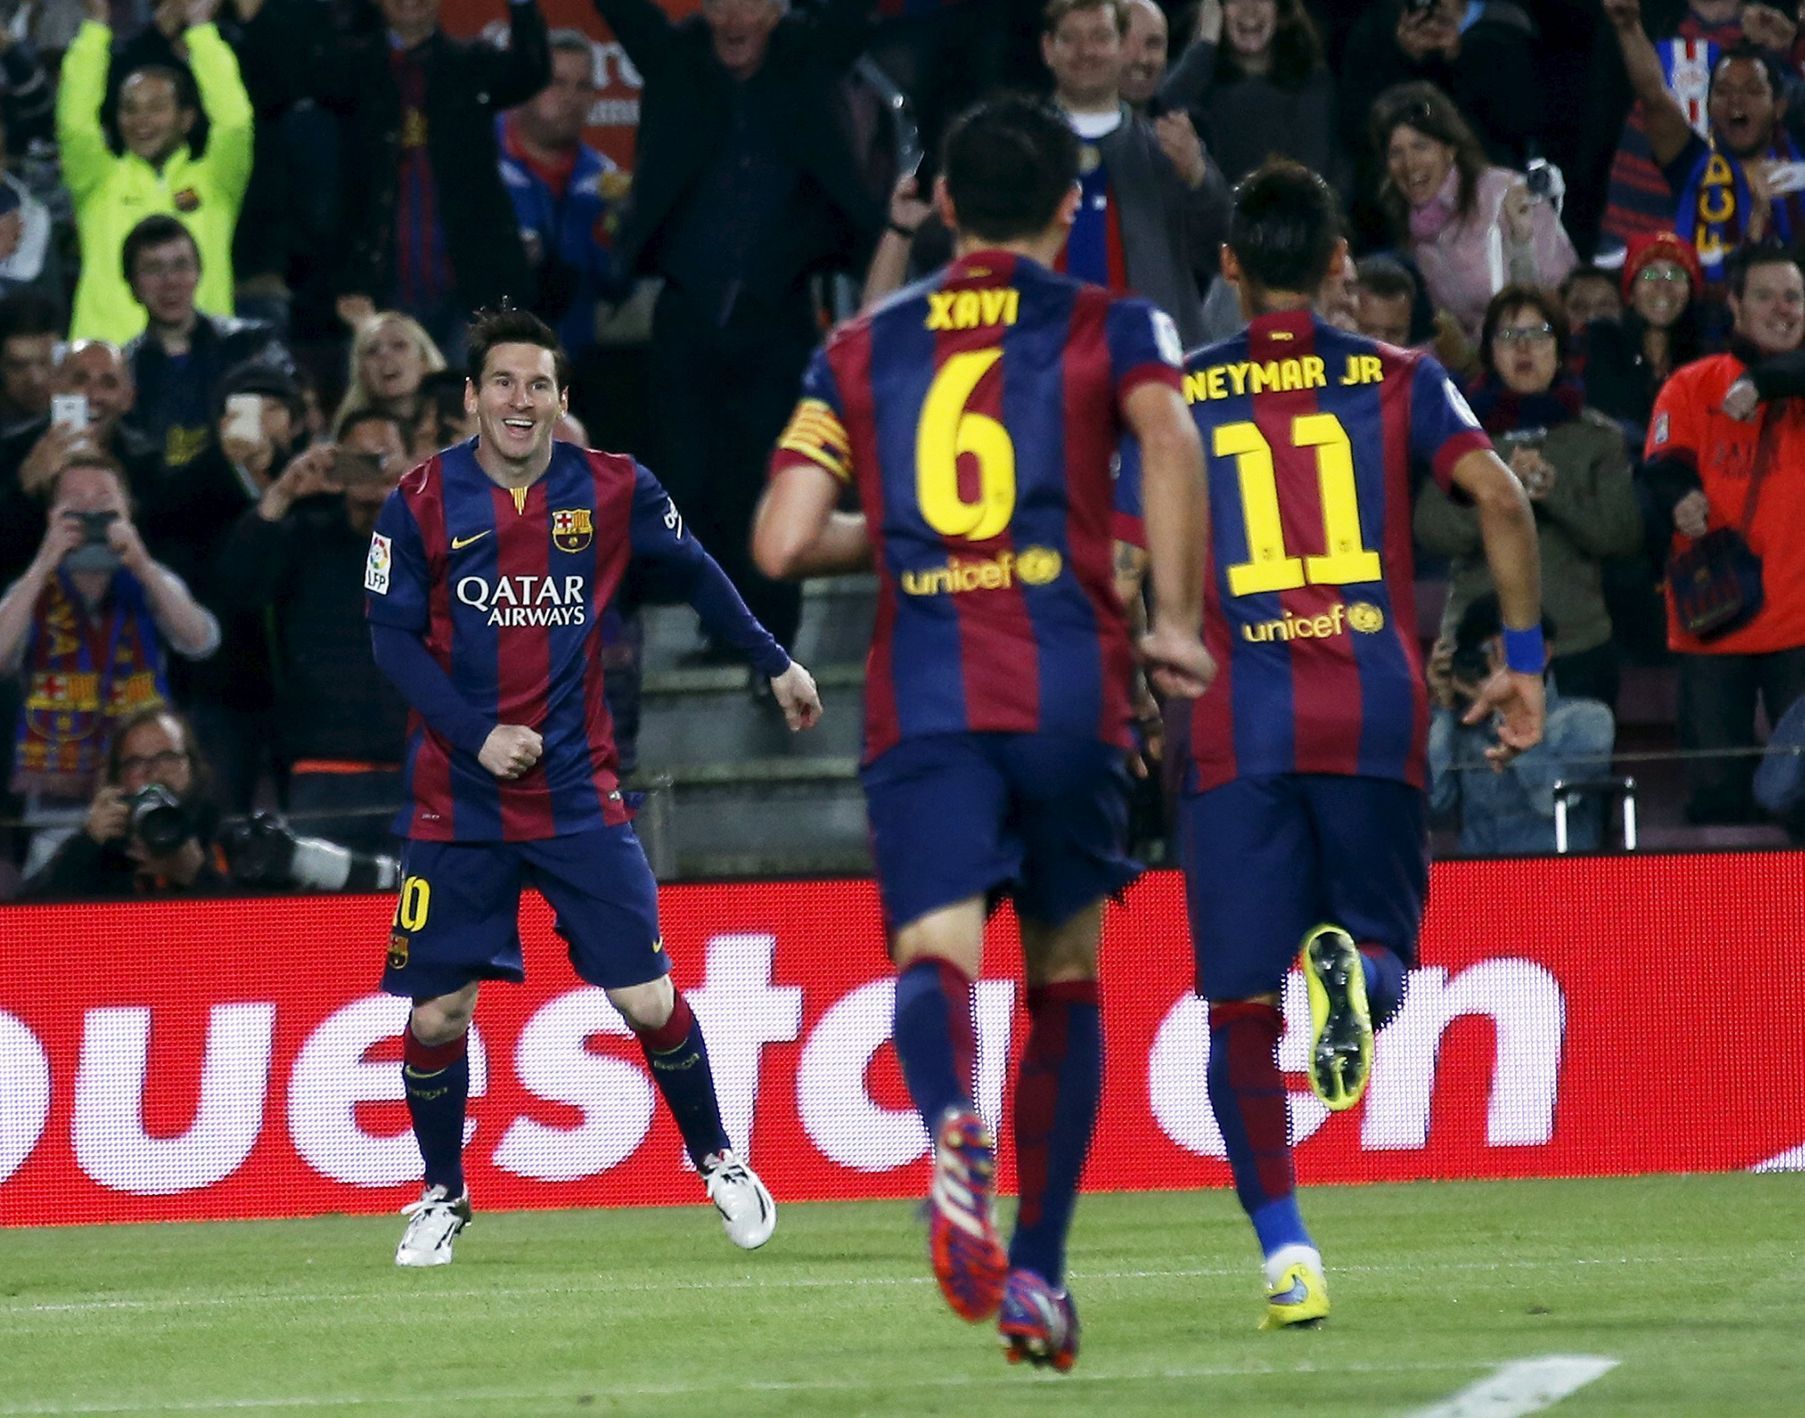 Barcelona's Lionel Messi celebrates his second goal with teammates Xavi Hernandez and Neymar against Getafe during their Spanish first division soccer match at Nou Camp stadium in Barcelona